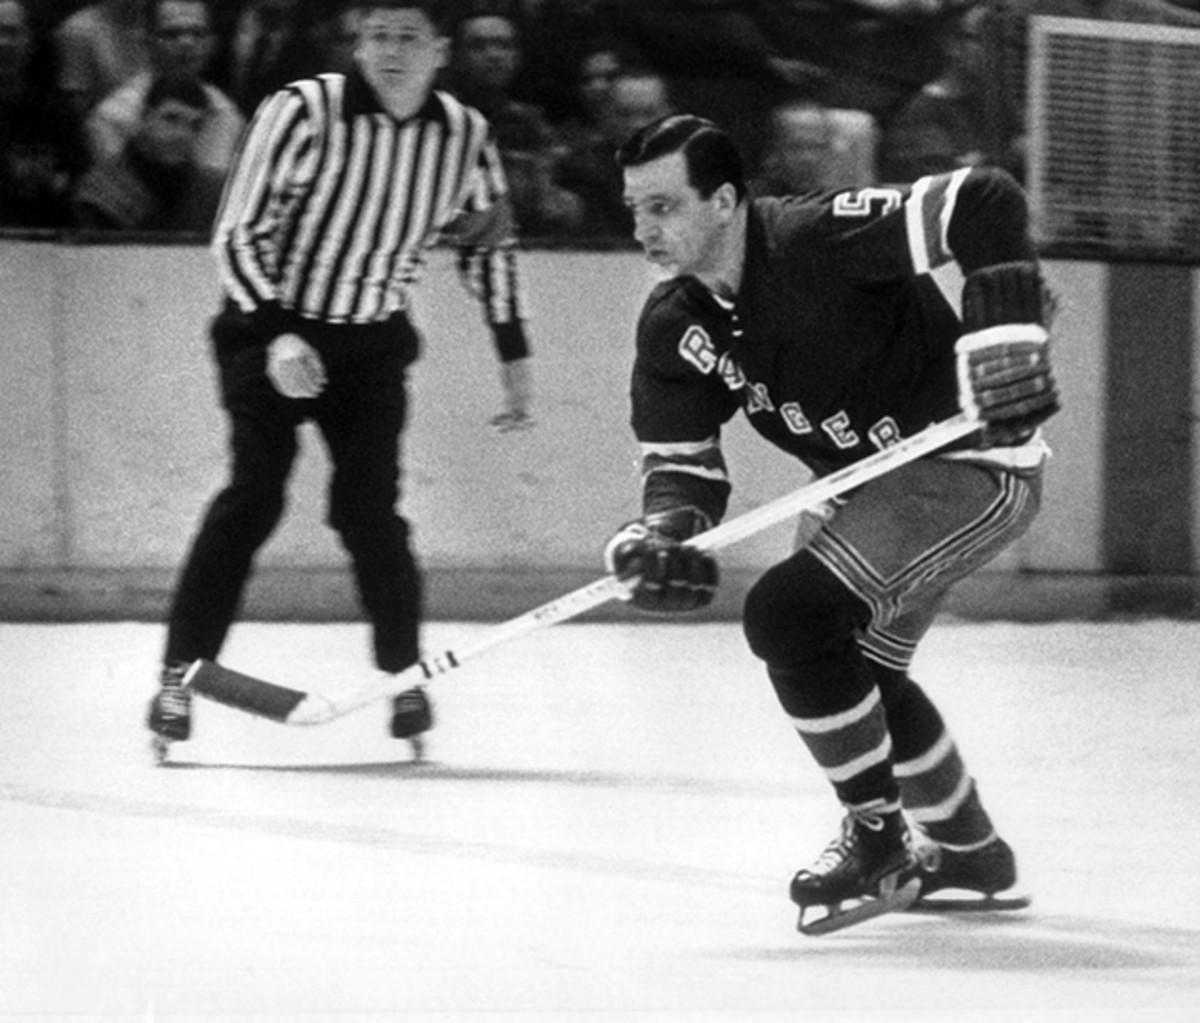 Bernie 'Boom Boom' Geoffrion skates up the ice during an NHL game circa 1966 at the Madison Square Garden. Geoffrion claimed to have invented the slapshot back in the 1950s.